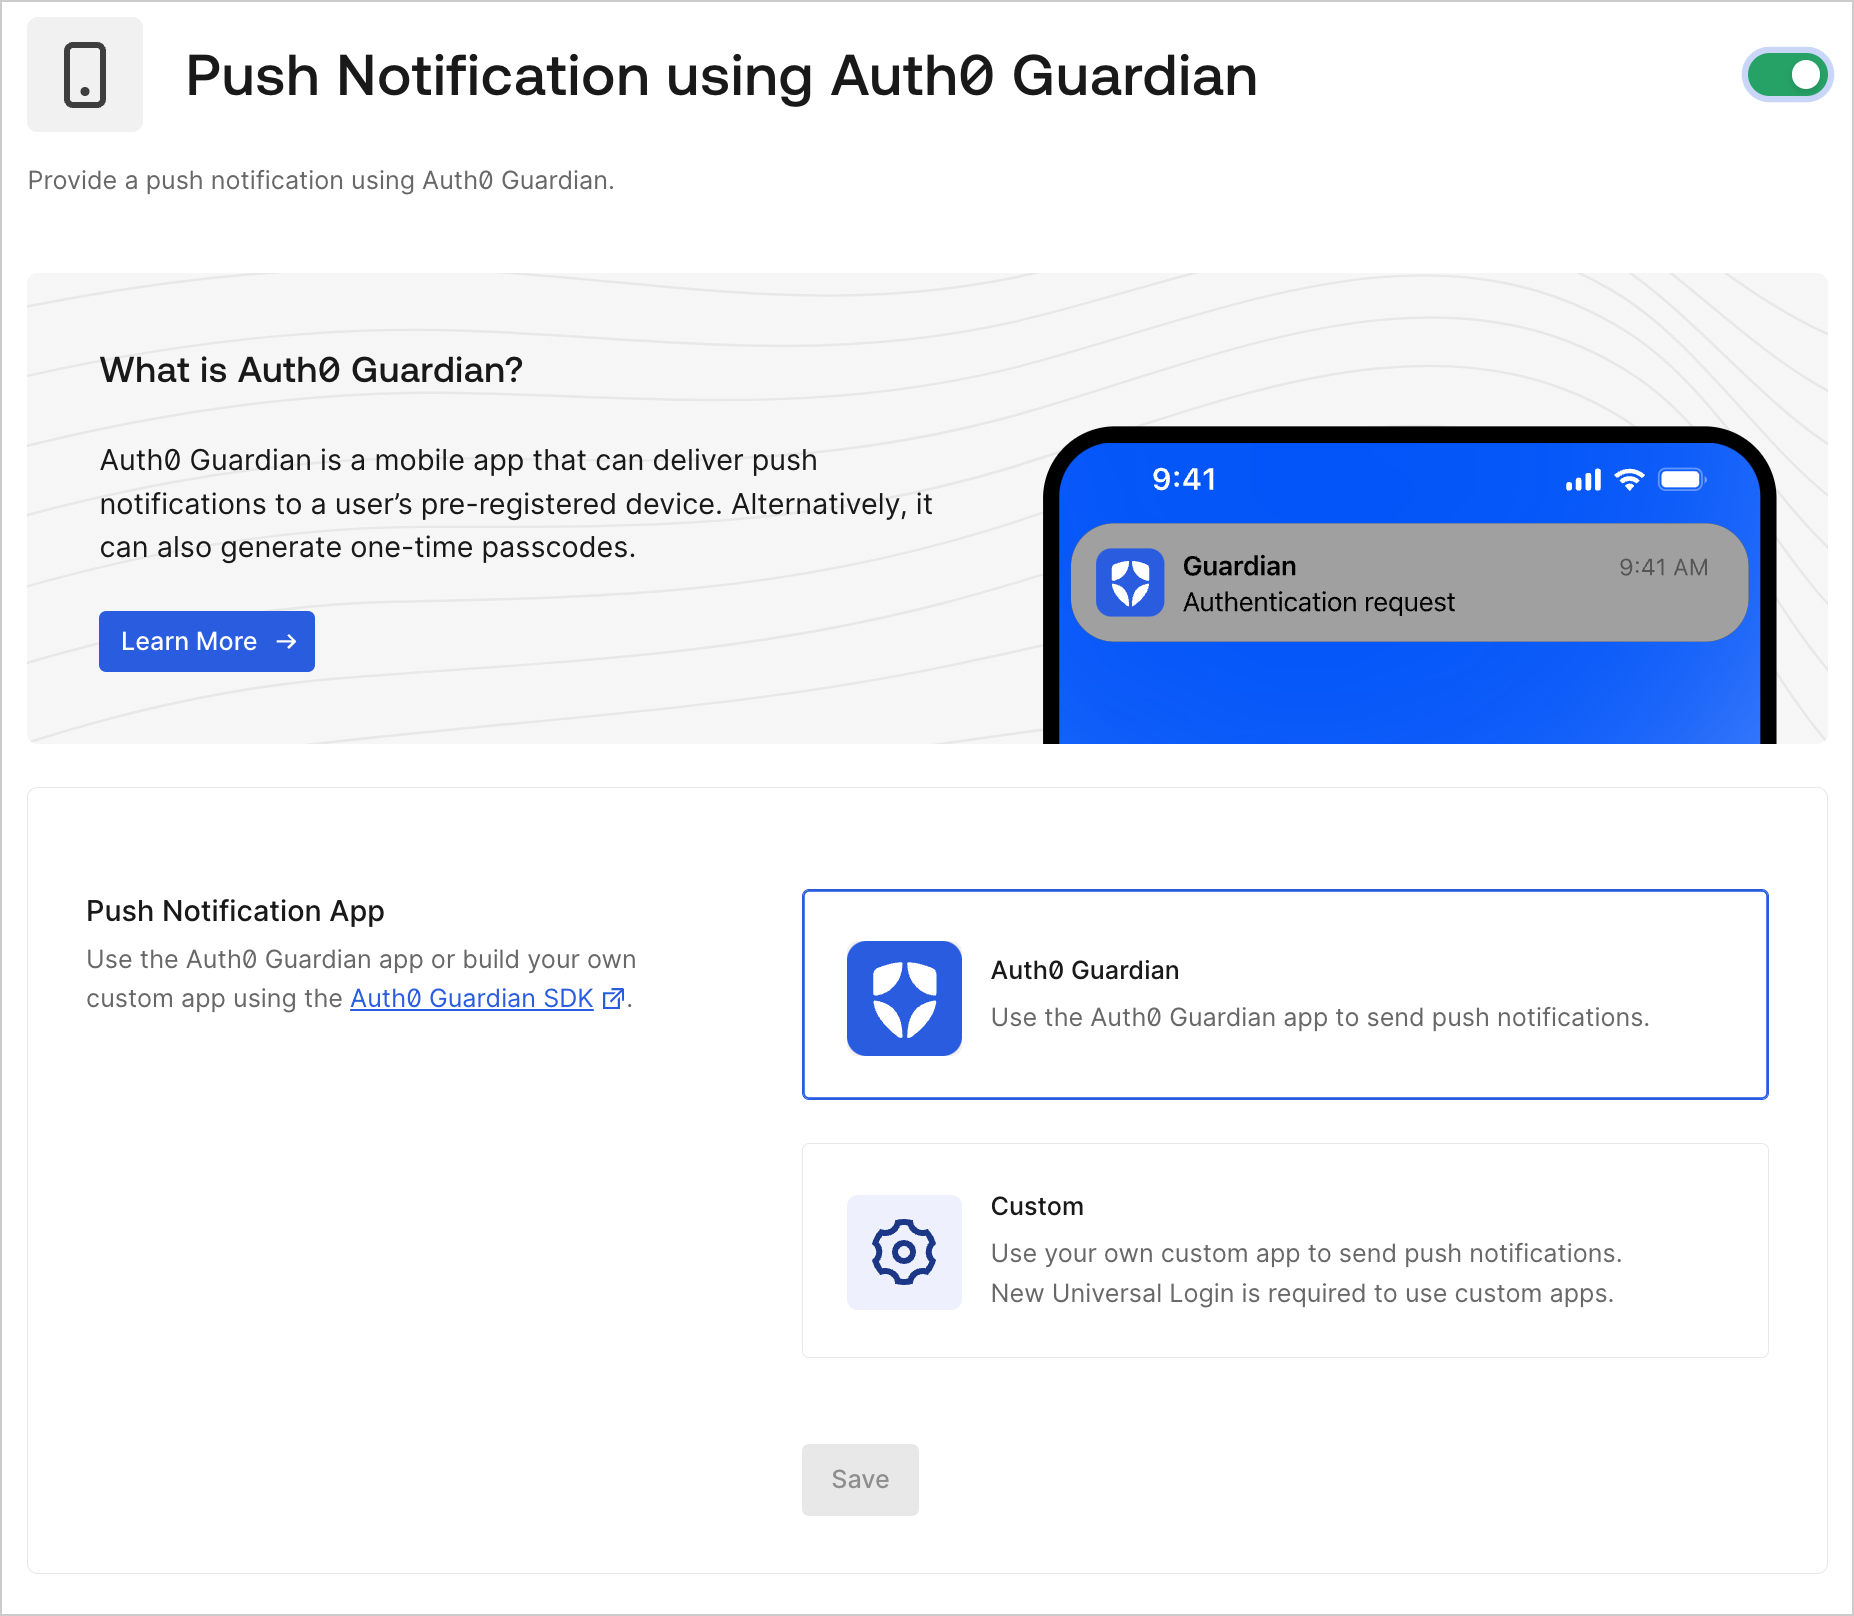 Auth0 Dashboard > Security > Multi-factor Auth > Push Notification using Auth0 Guardian